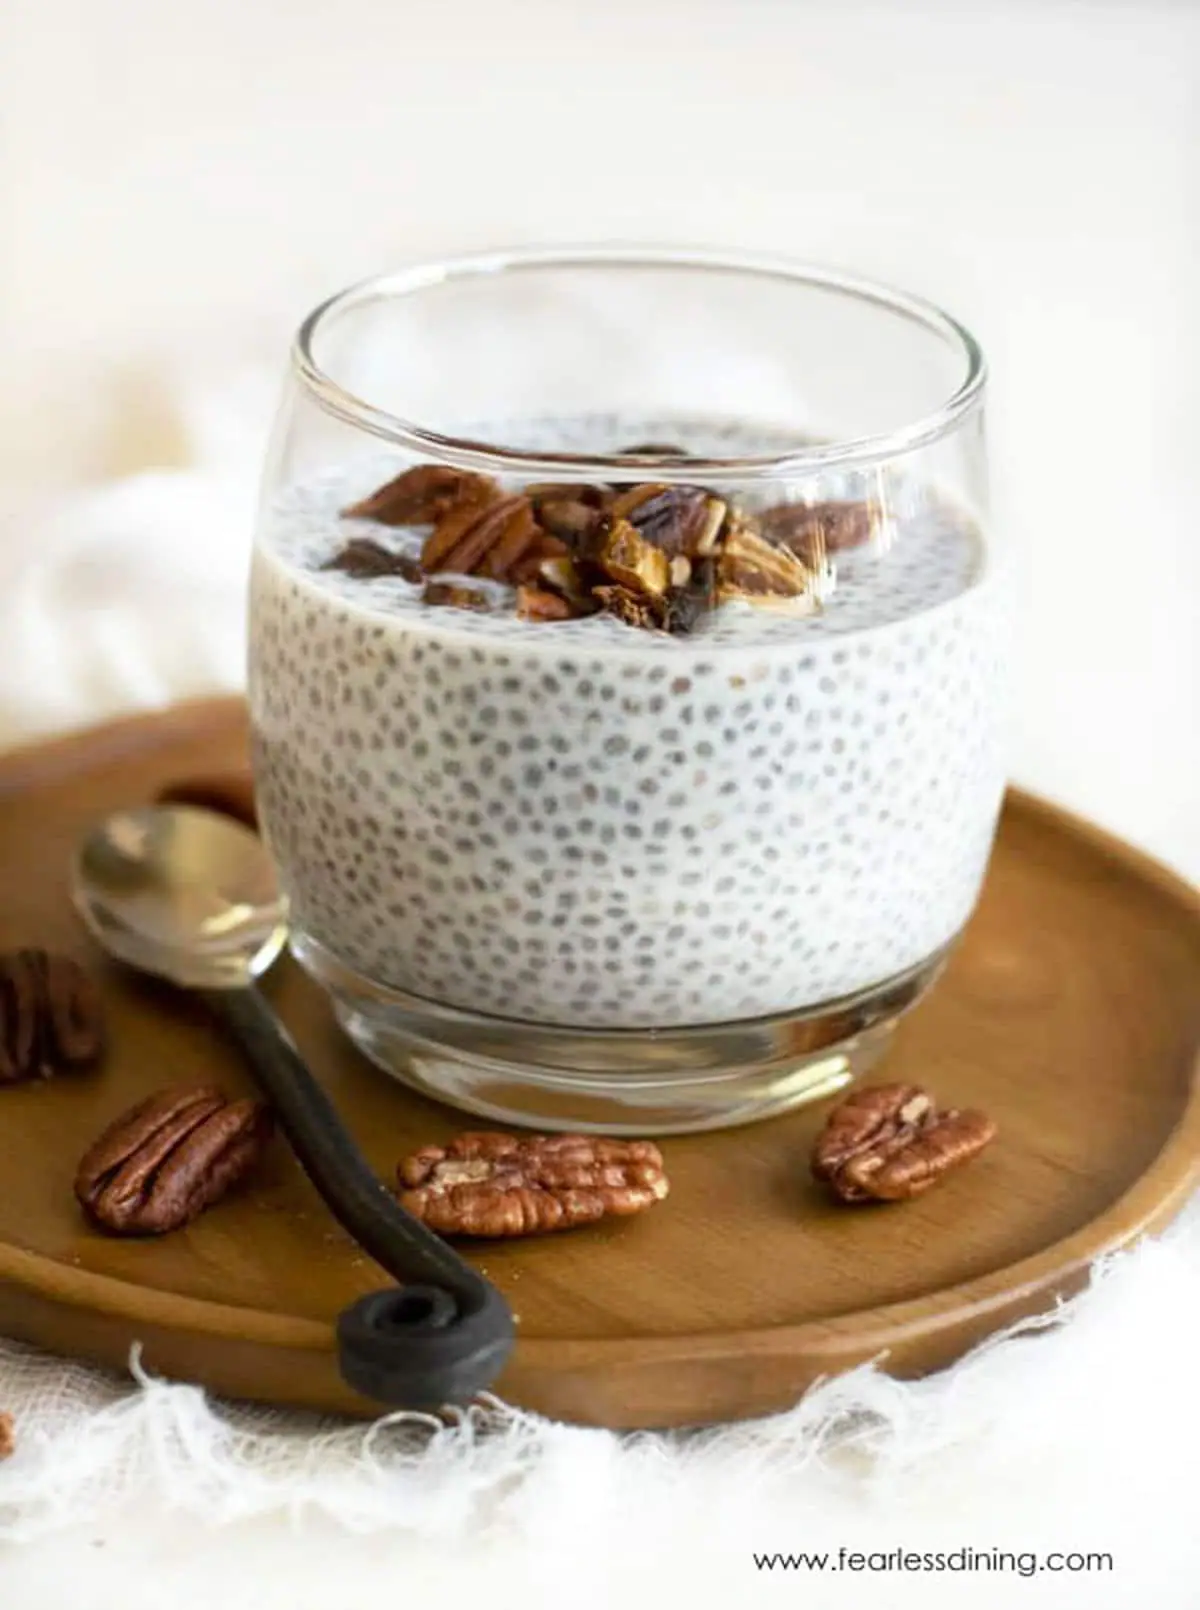 a glass full of chia pudding. The glass is on a small wooden plate